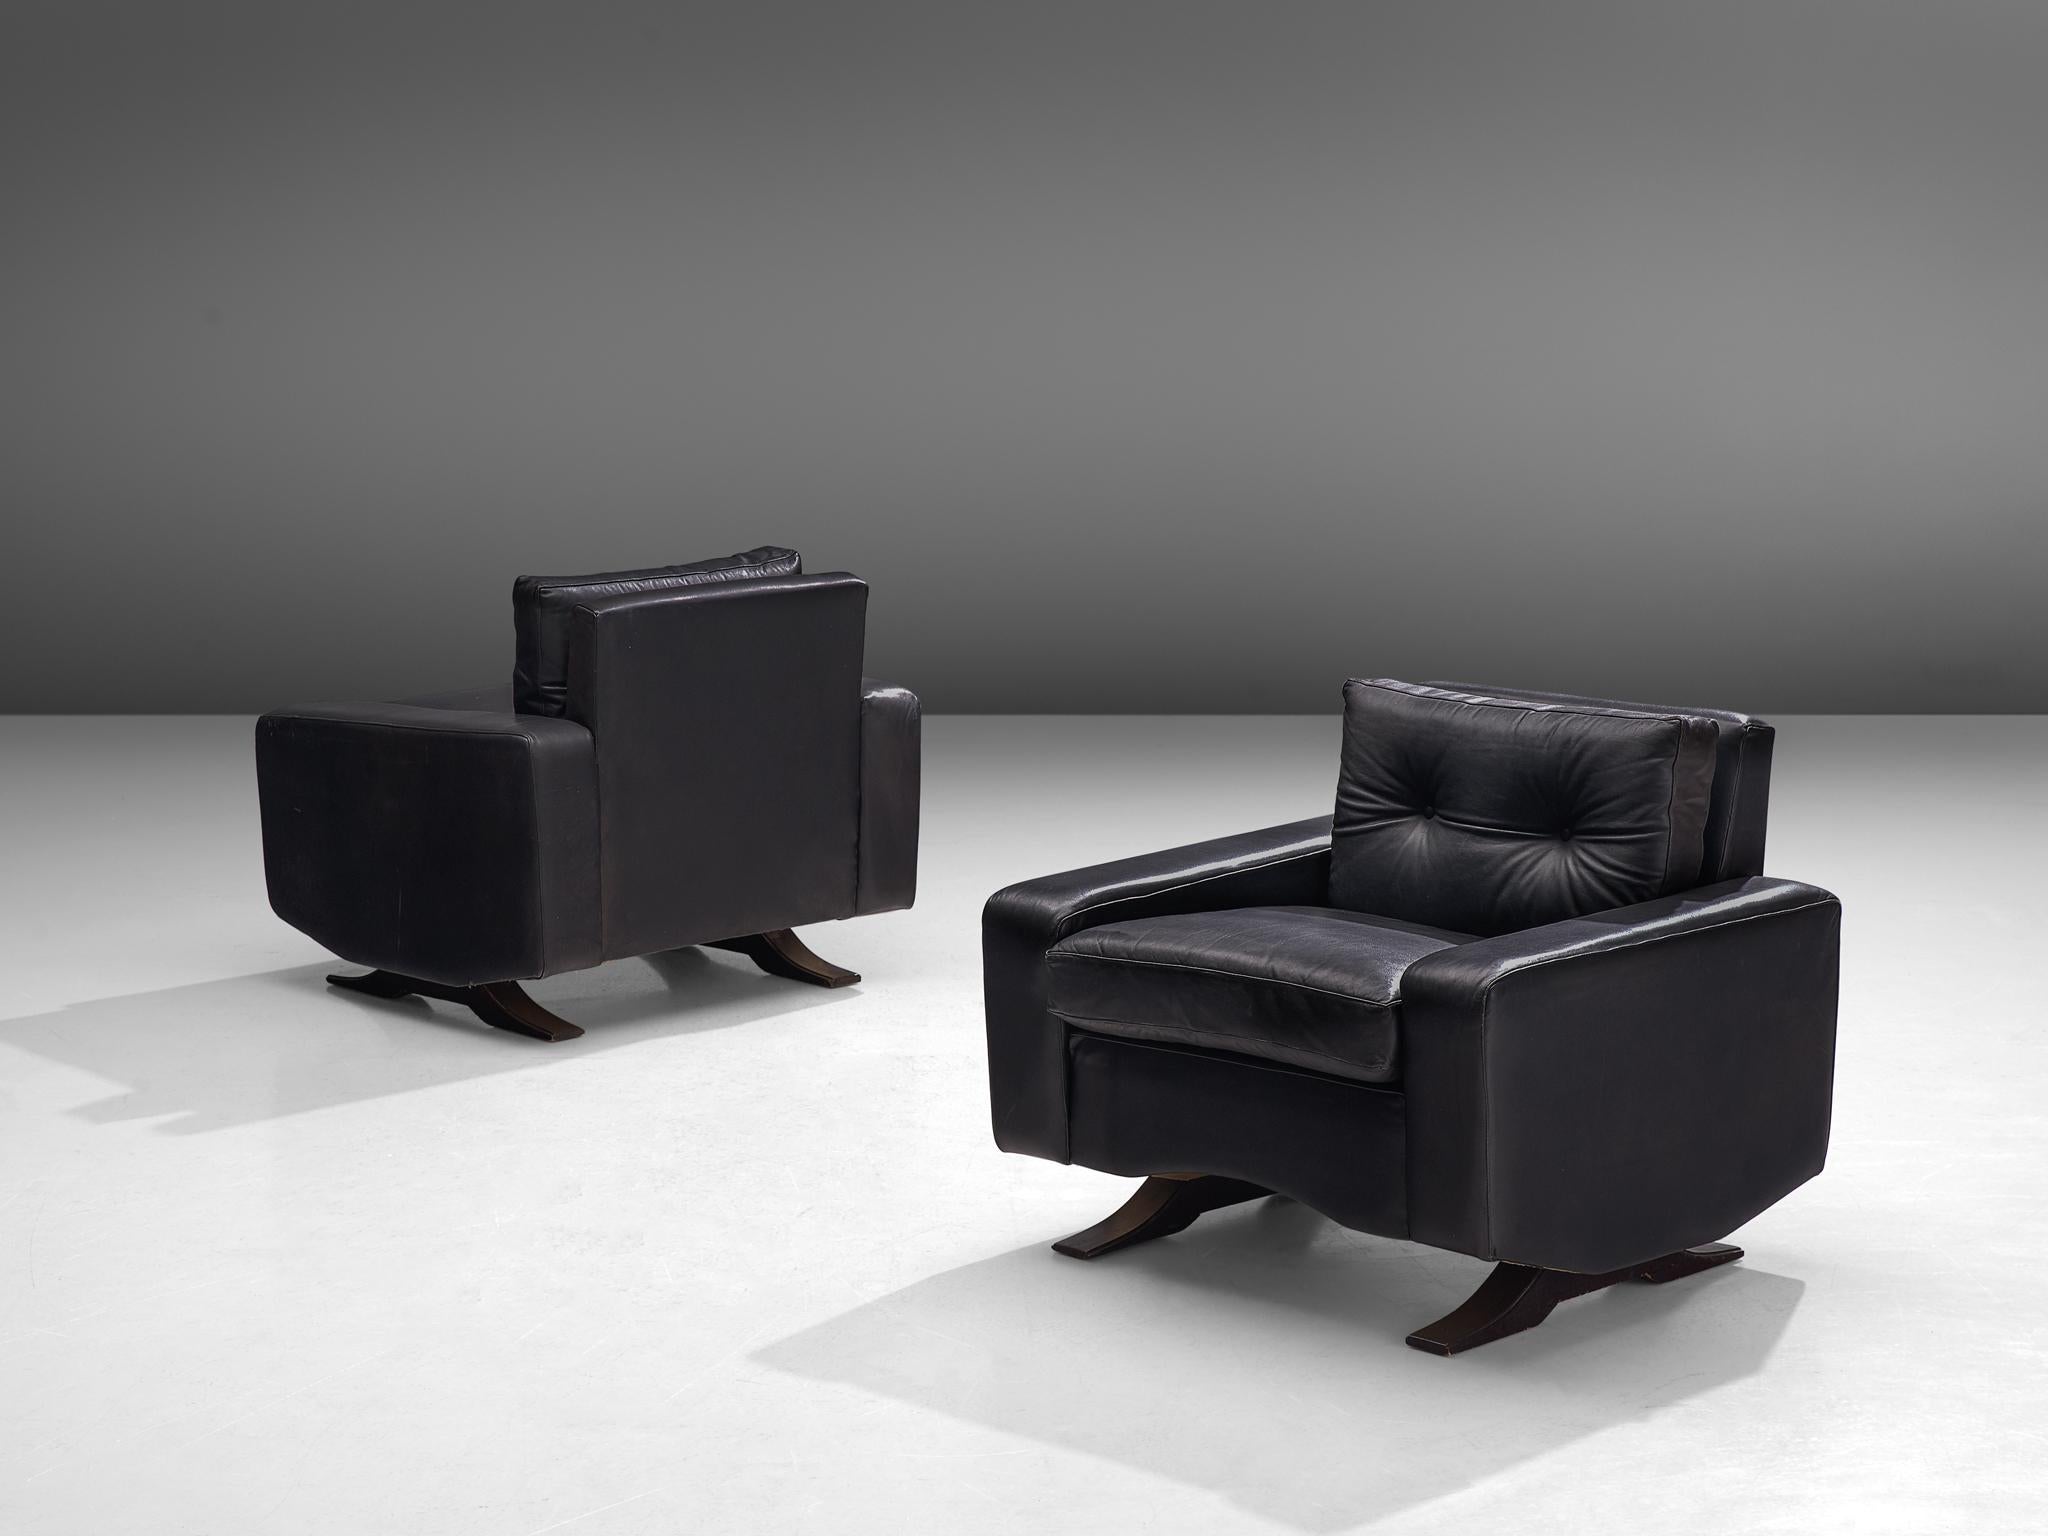 Franz Sartori for Flexform, pair of lounge chairs, leather and beech, Italy, 1960s

Sturdy pair of lounge chairs in black leather by the Italian sculptor Franz Sartori. These chairs feature a modern design due to the straight lines. The waved